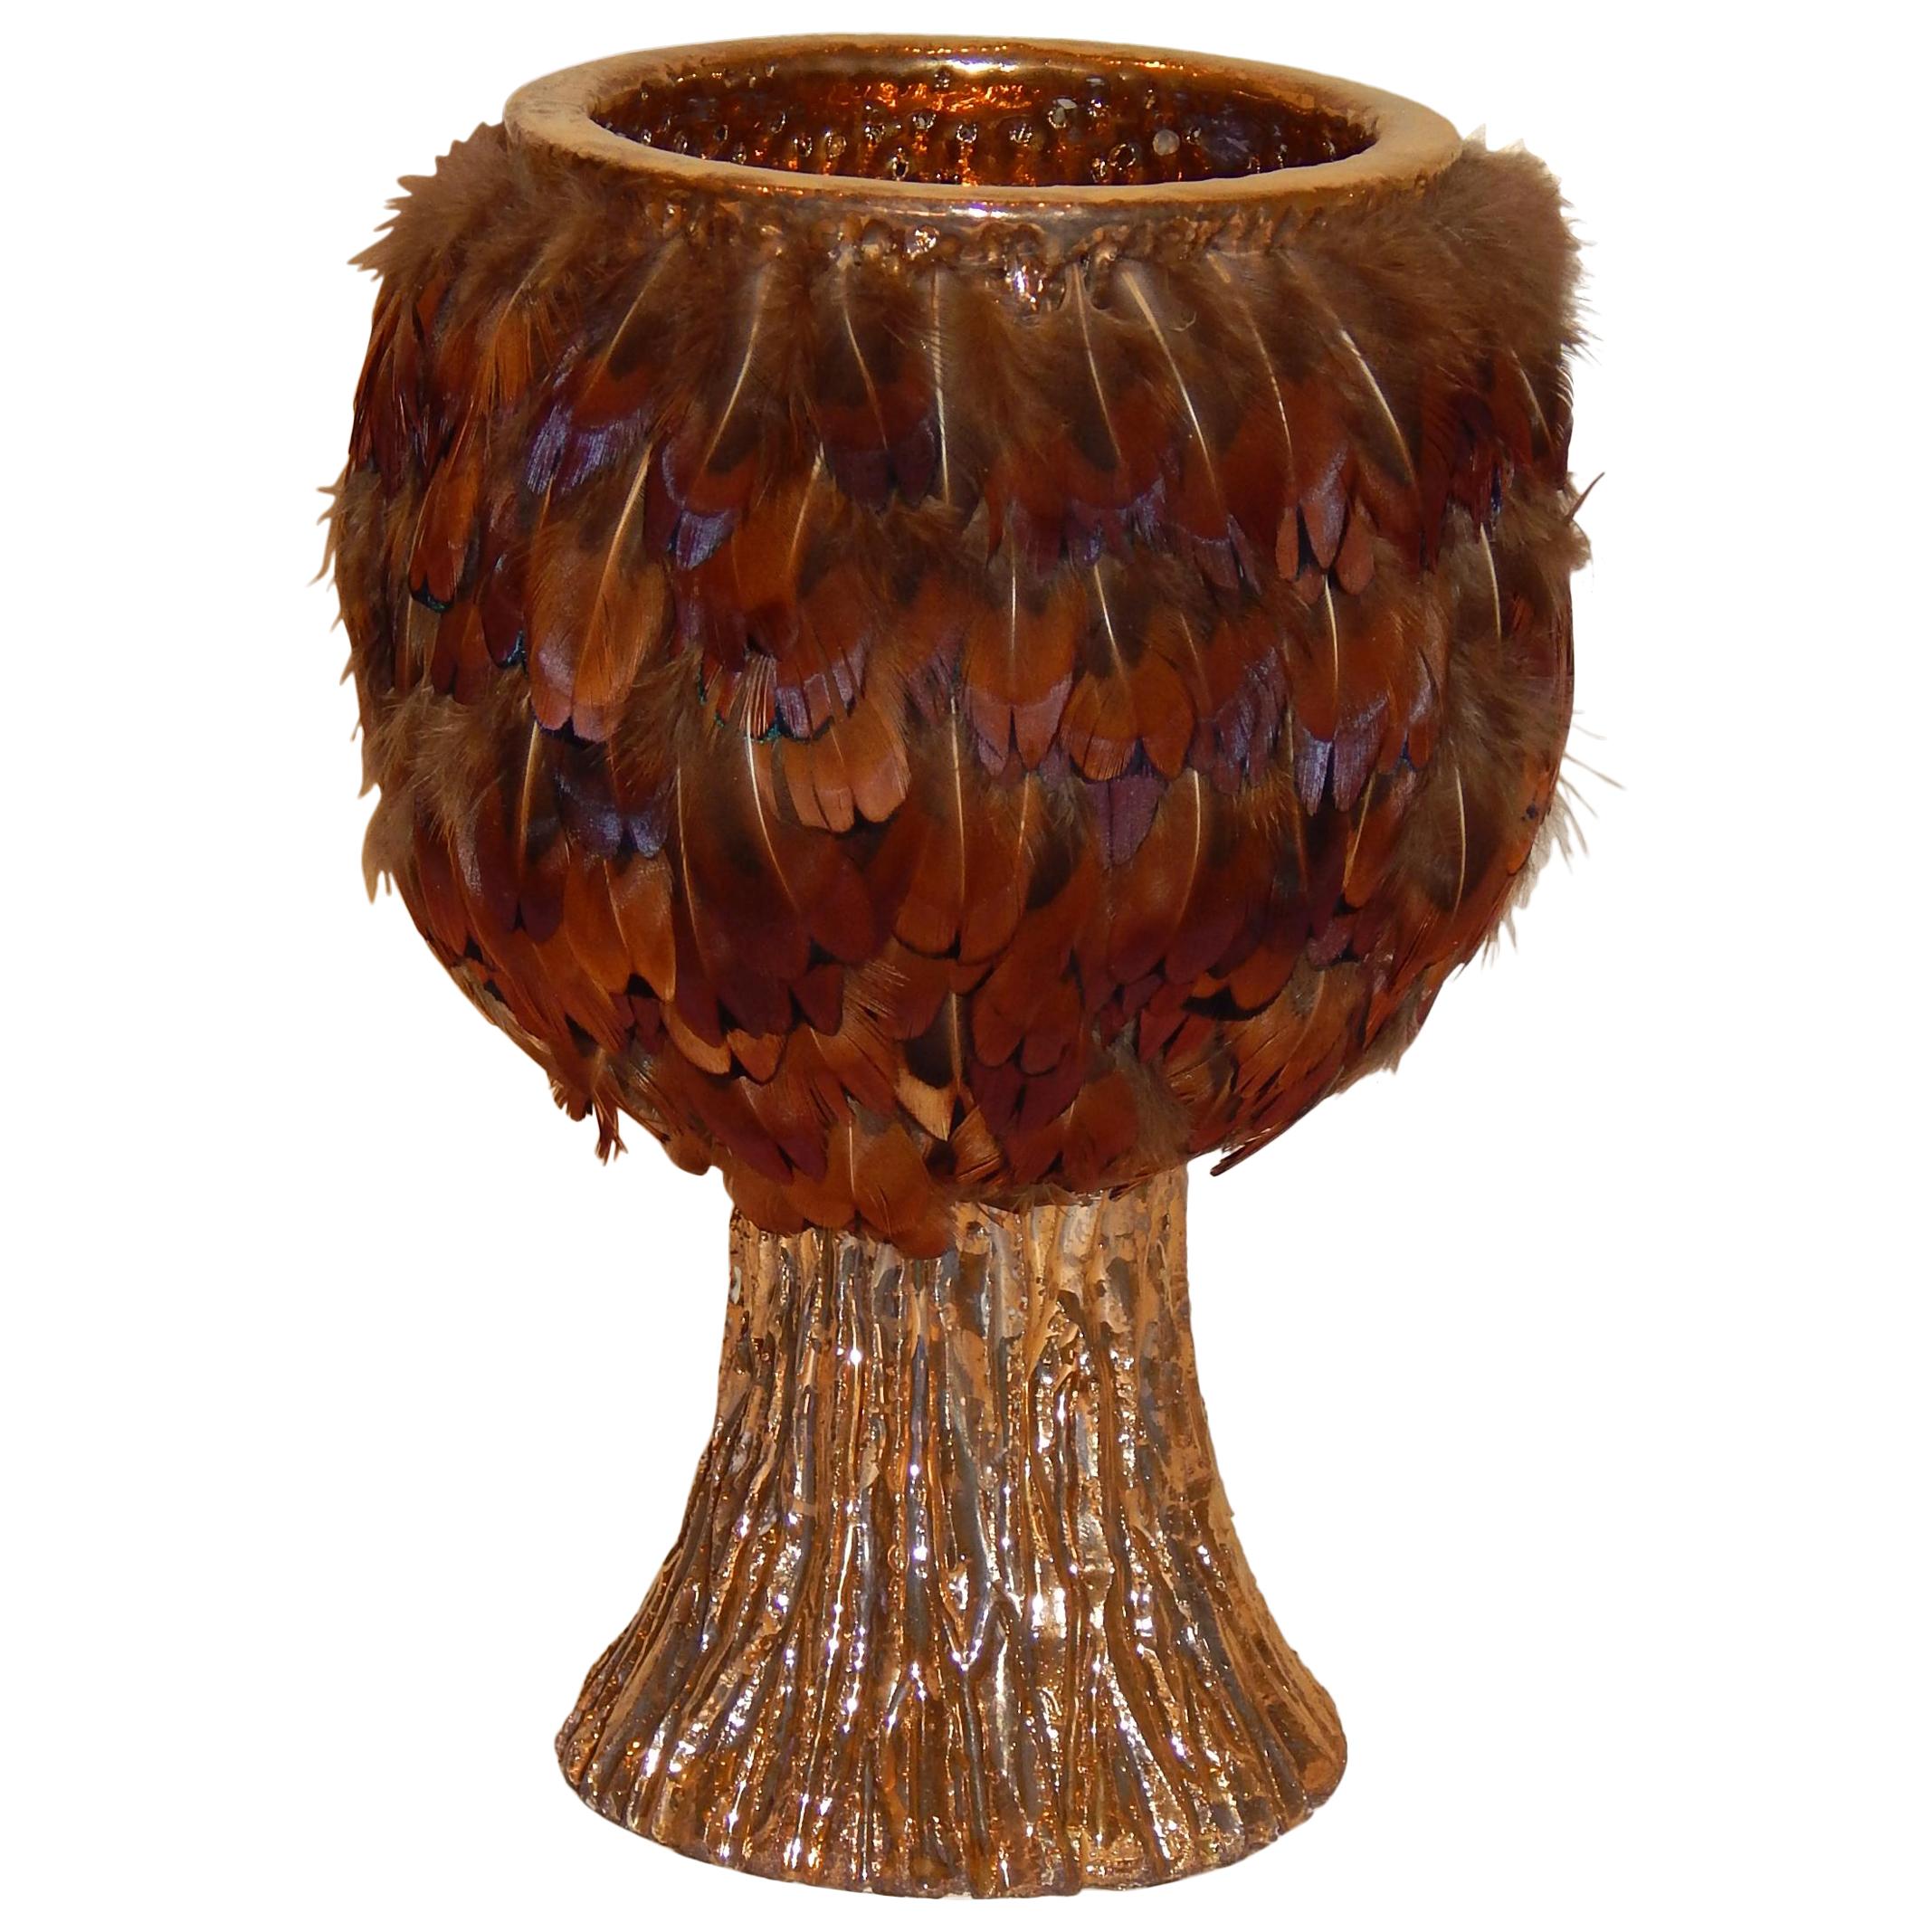 Ken Shores Art Pottery Chalice Form Fetish Pot with Applied Feathers